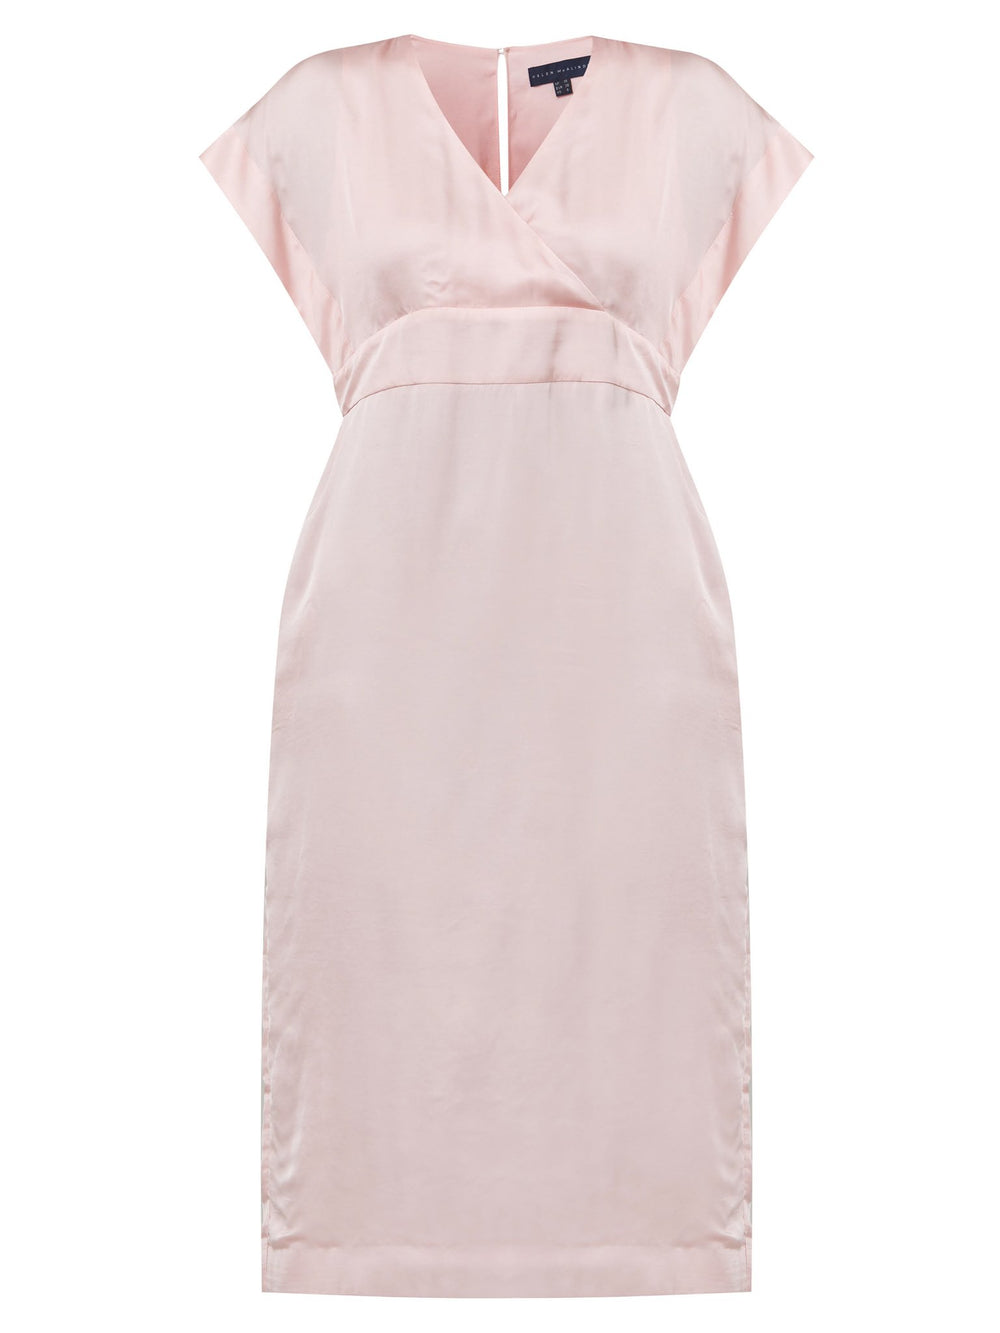 Classic occasion wear, modernized. Meet the Fleur dress in luxurious blossom pink satin viscose. An easy-fitting silhouette with a V-neckline, falls to the mid-calf and features side slit, pockets, and an elegant key-hole back neck detail. Attending a summer wedding? Mother of the bride? Heading to the races? This is the dress for you.